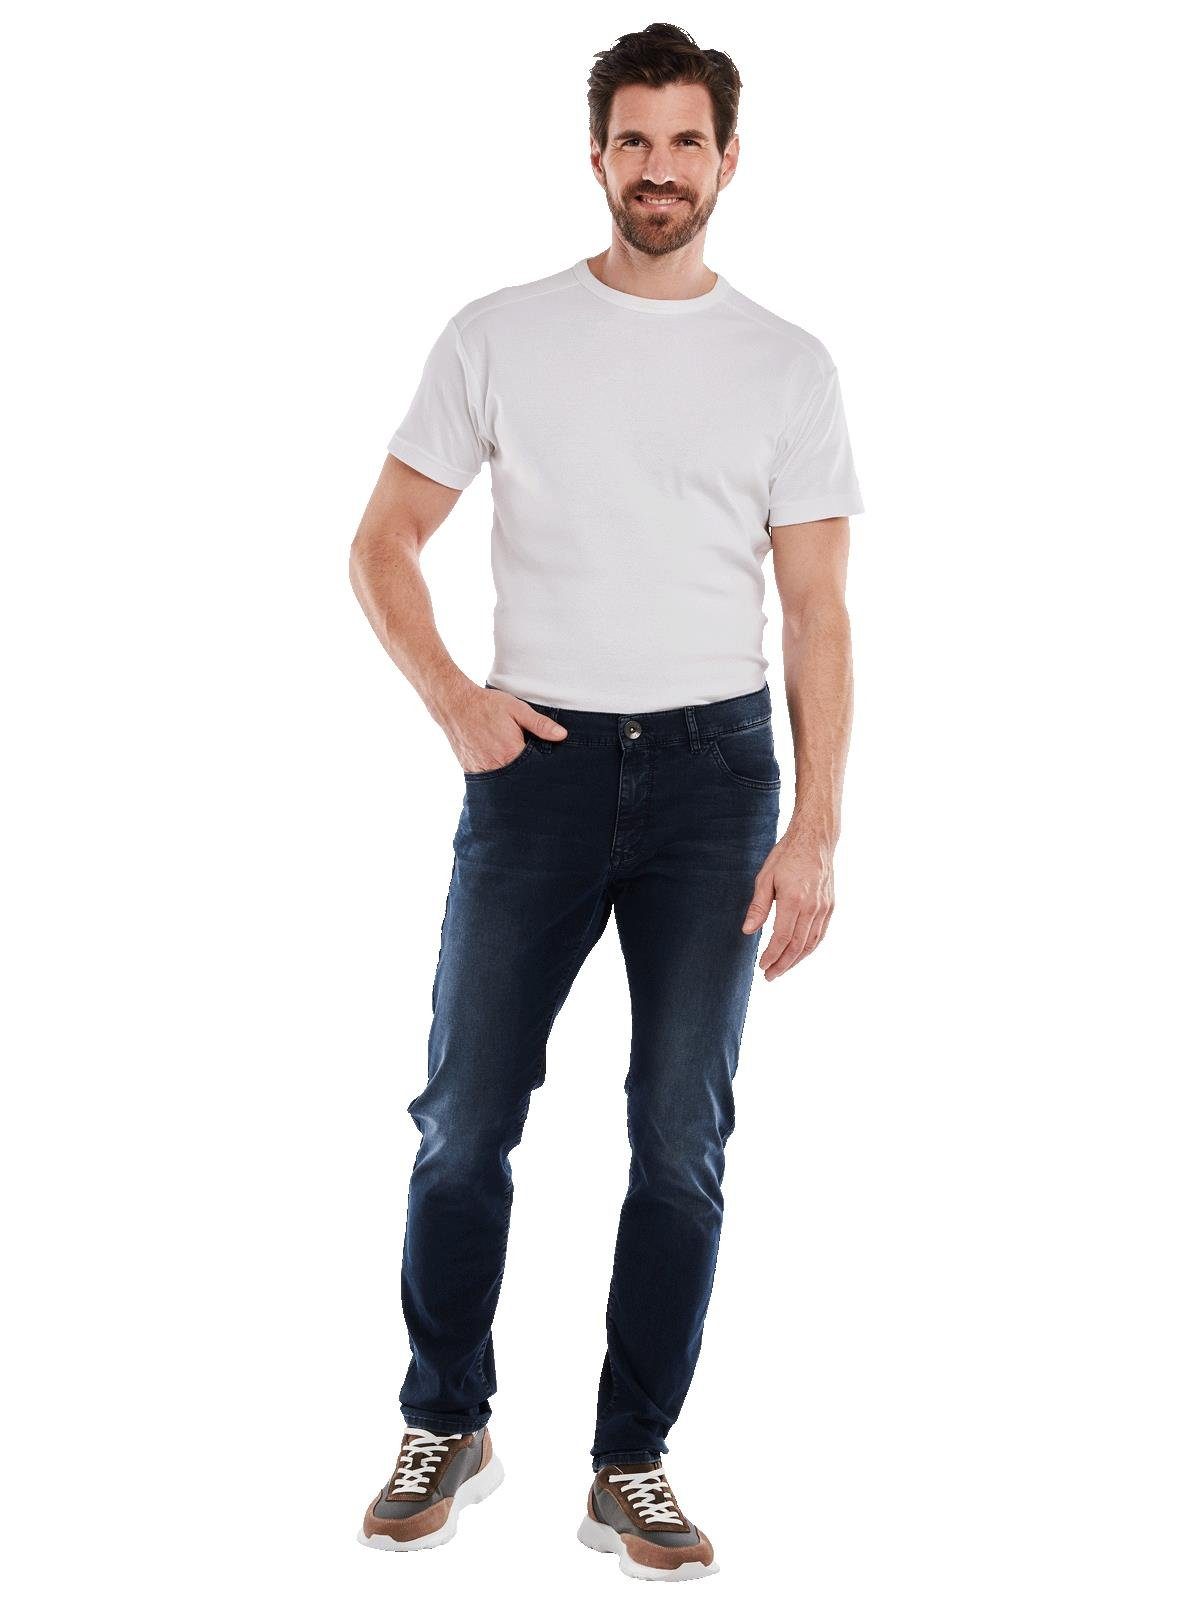 5-Pocket Engbers Stretch-Jeans Jeans Superstretch